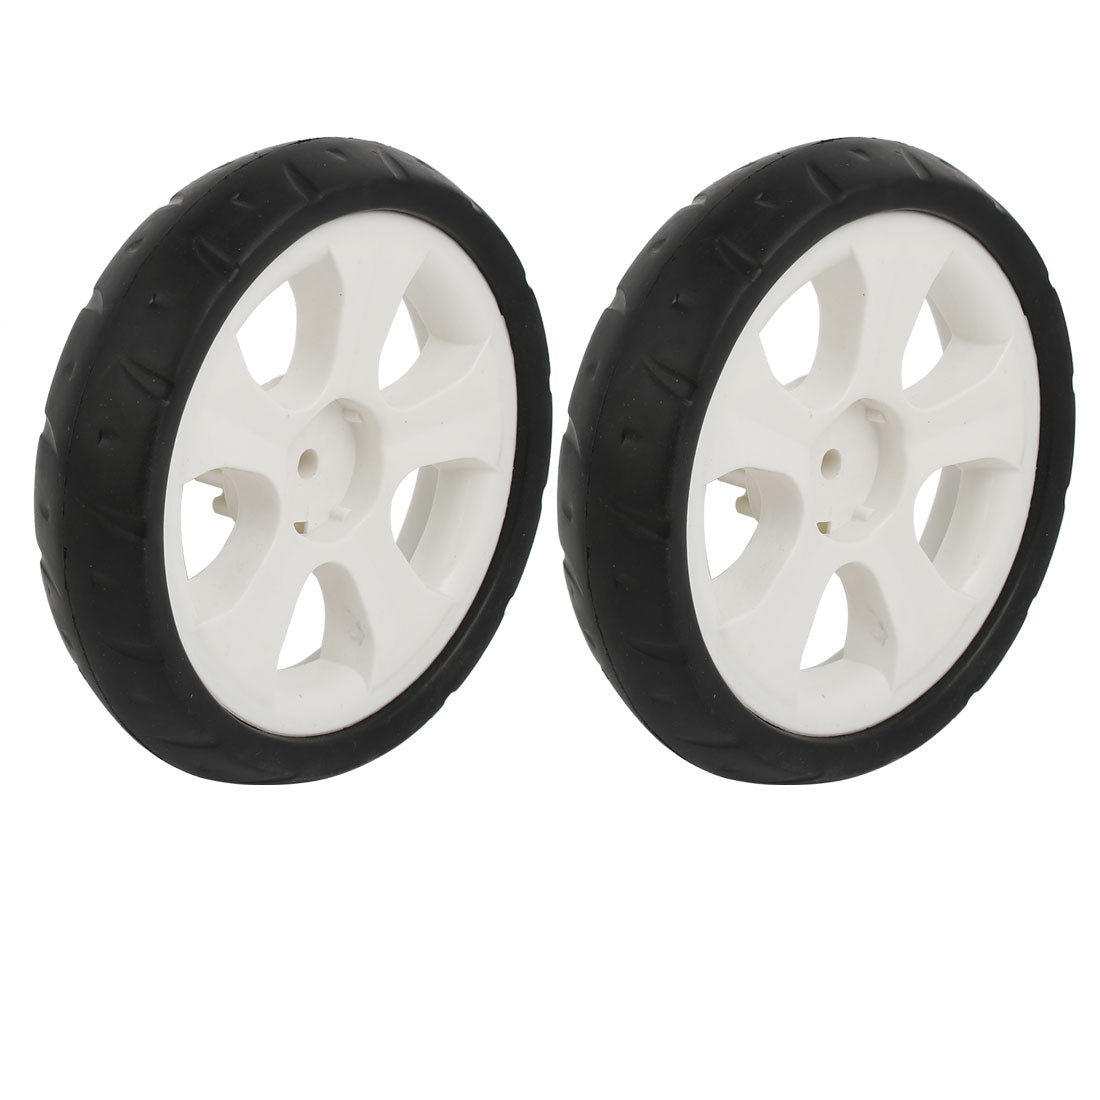 uxcell Uxcell Shopping Cart Wheels Trolley Caster Rubber Foaming 2pcs